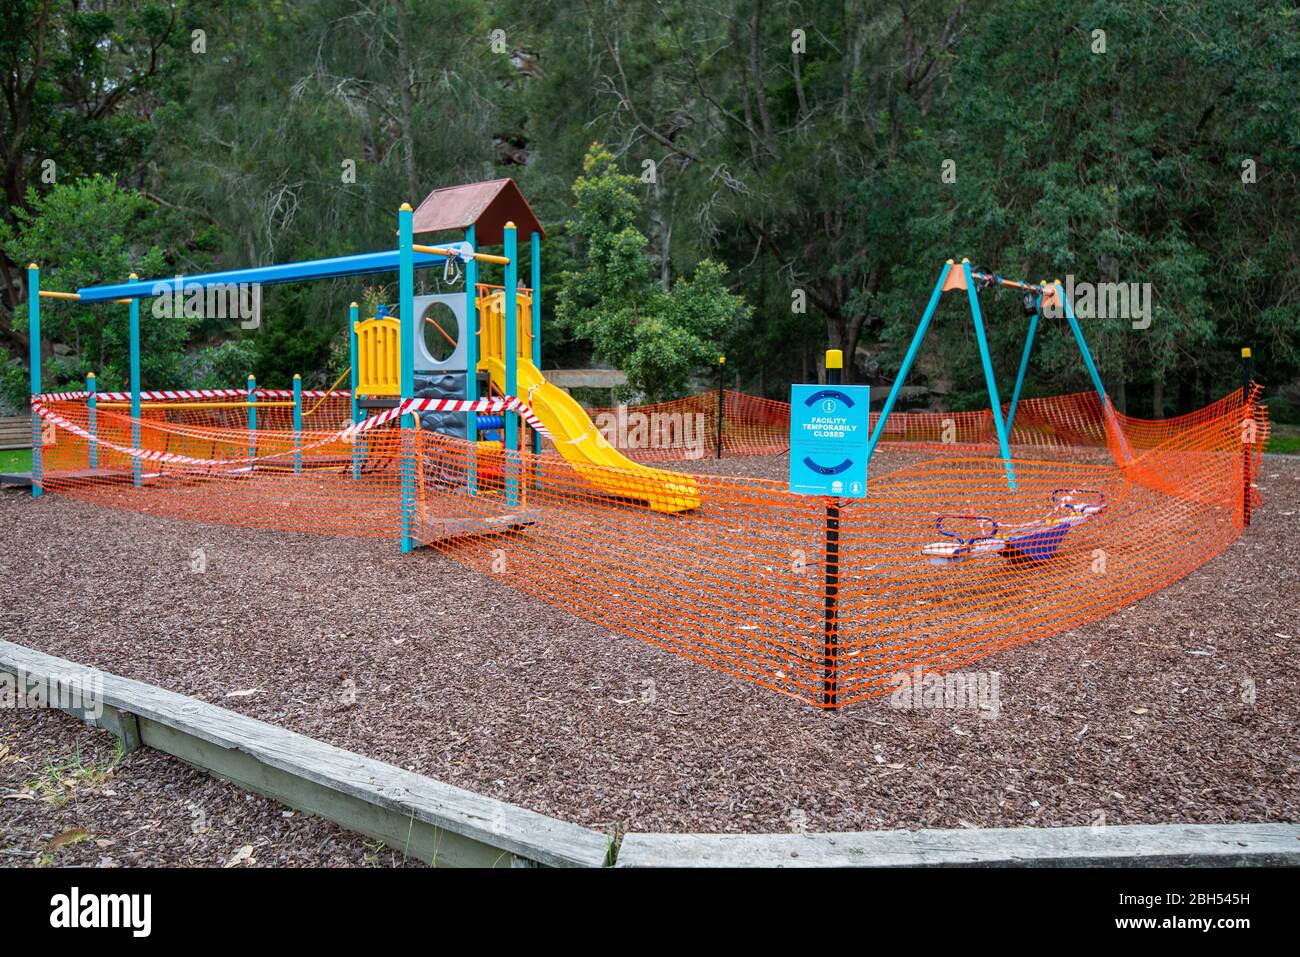 Due to COVID-19 pandemic, a public children's playground is closed and fenced off to the public. Stock Photo